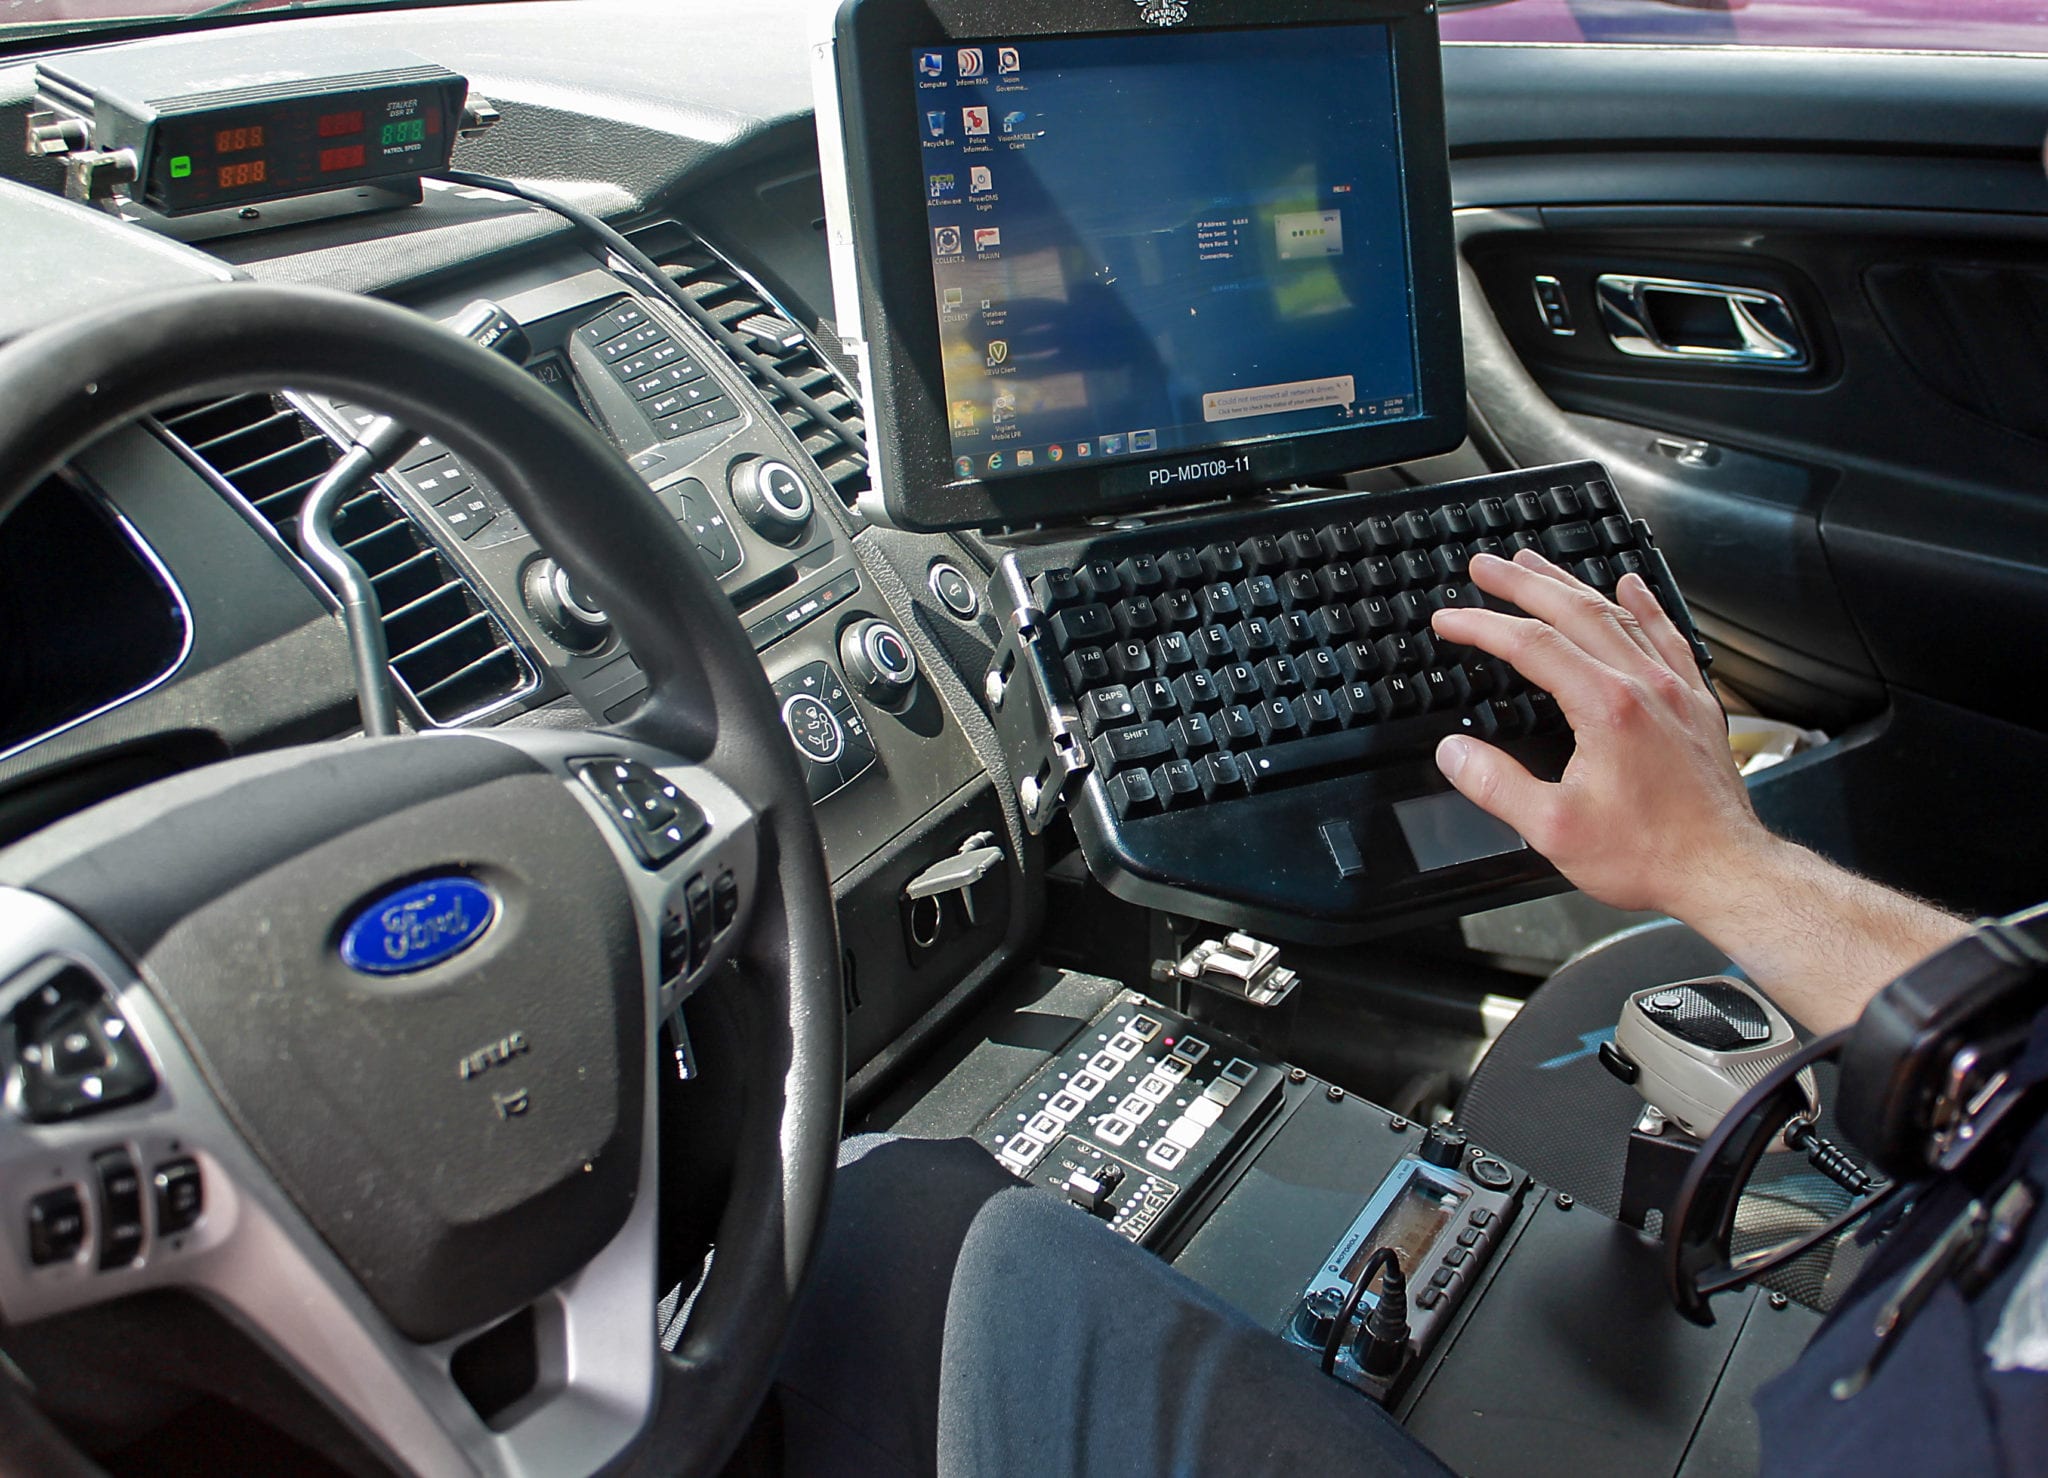 AT&T Fireman using laptop in police car